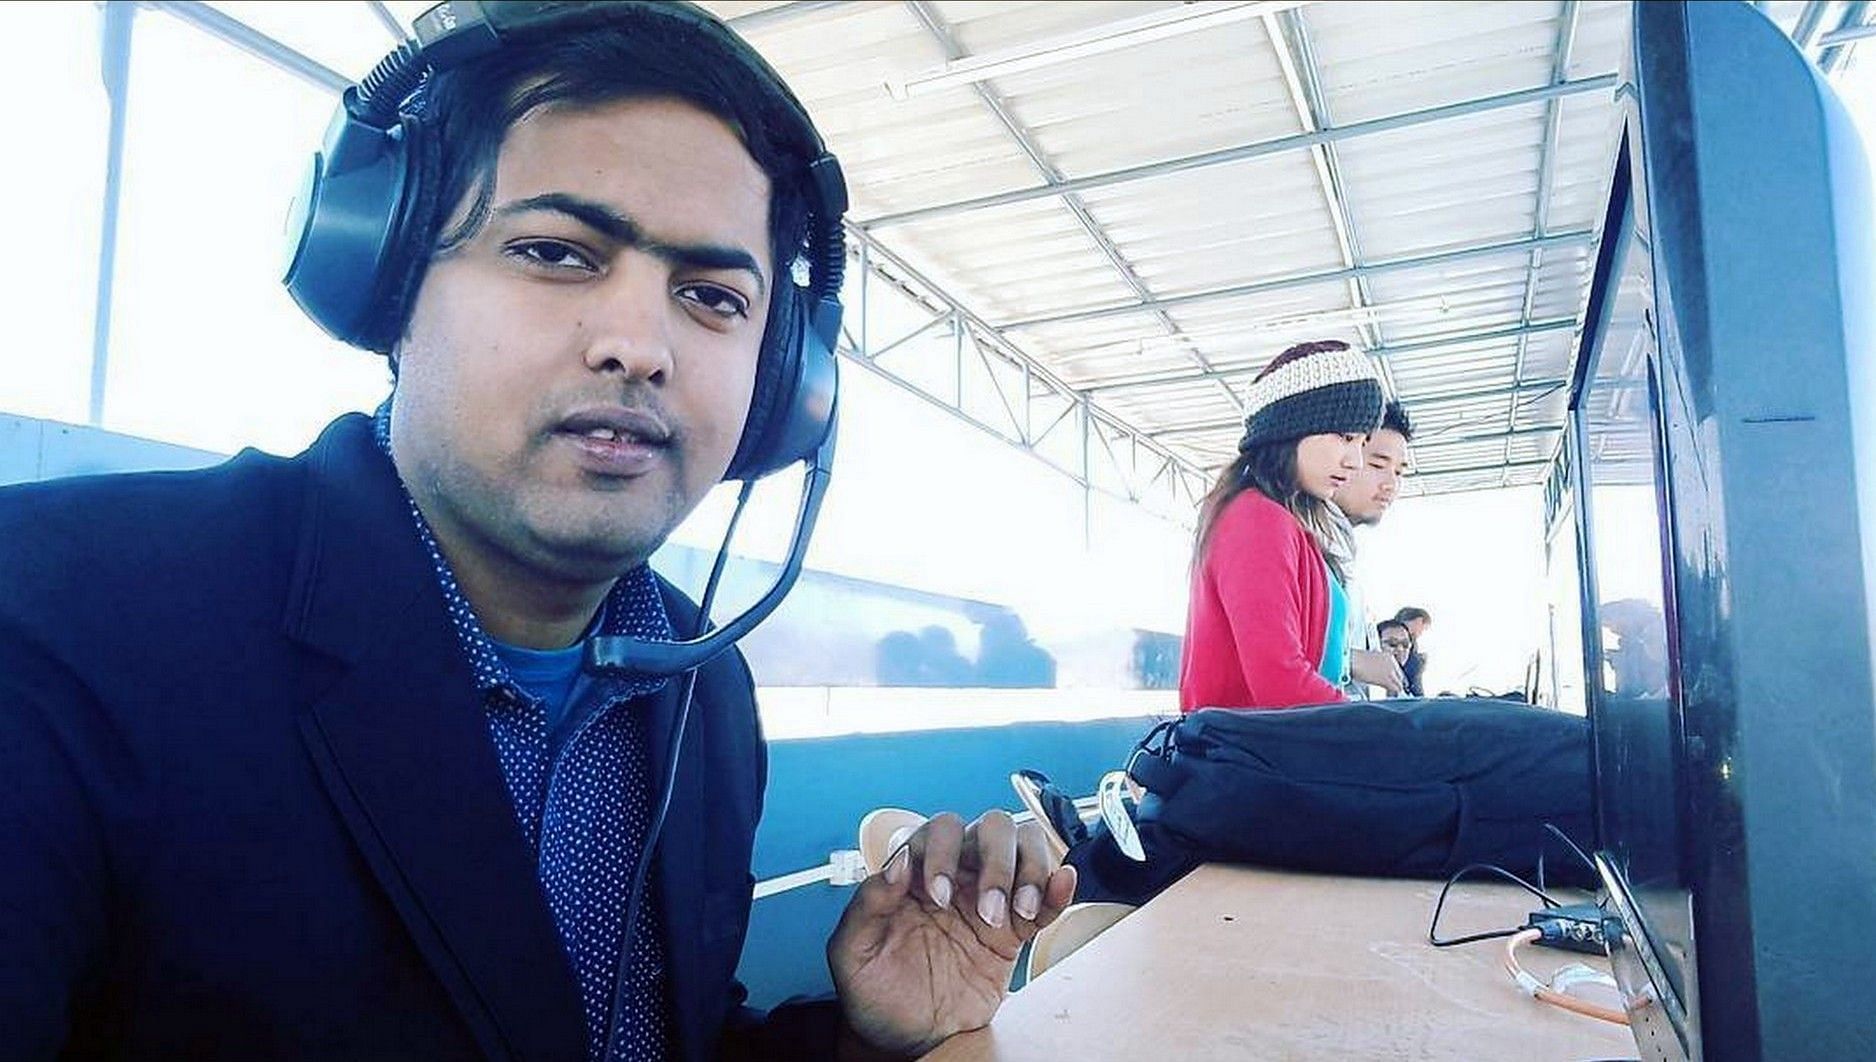 Suman Chakraborty commentating on the 2015-16 I-League tie between Aizawl FC and Mohun Bagan in Aizawl.